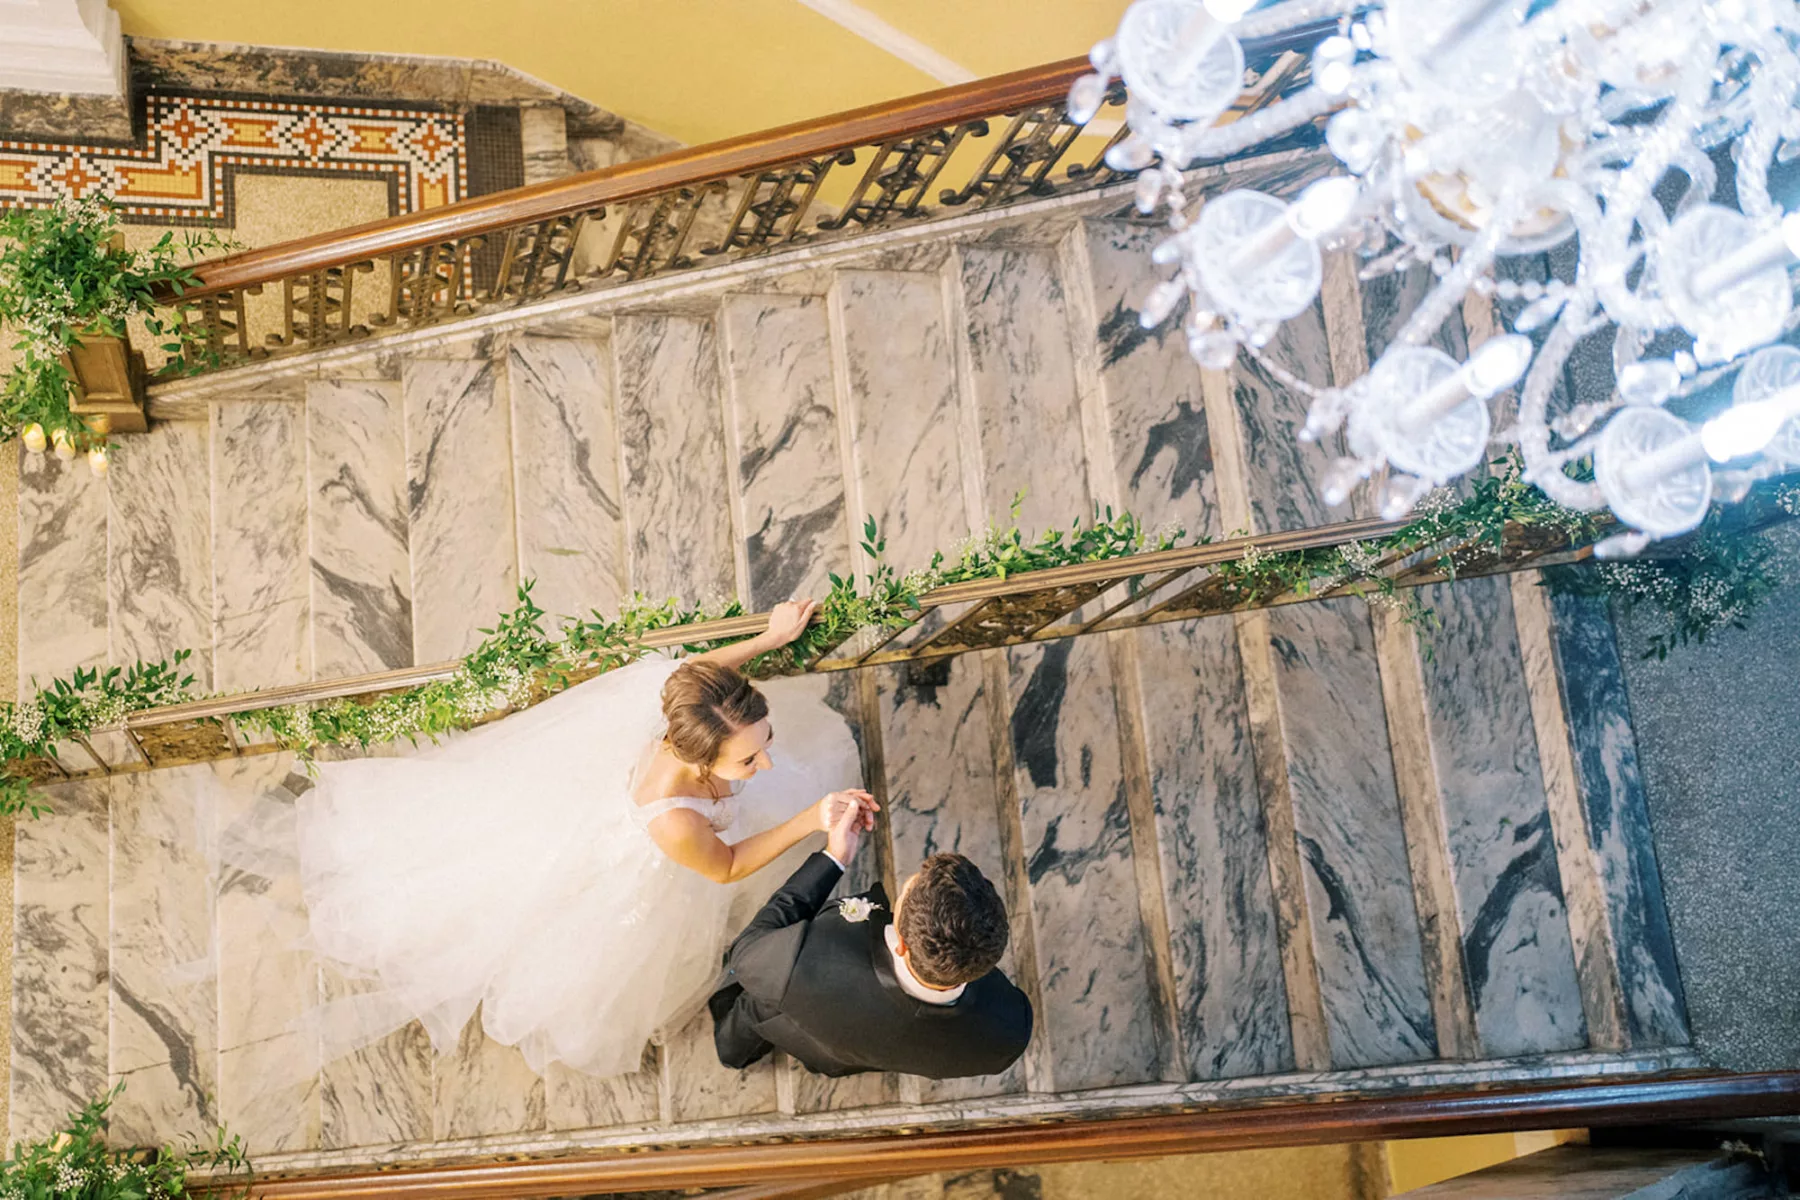 Bride and Groom Stair Wedding Portrait | Greenery Banister Garland Decor Ideas | Tampa Bay Photographer Eddy Almaguer Photography | Venue Centro Asturiano